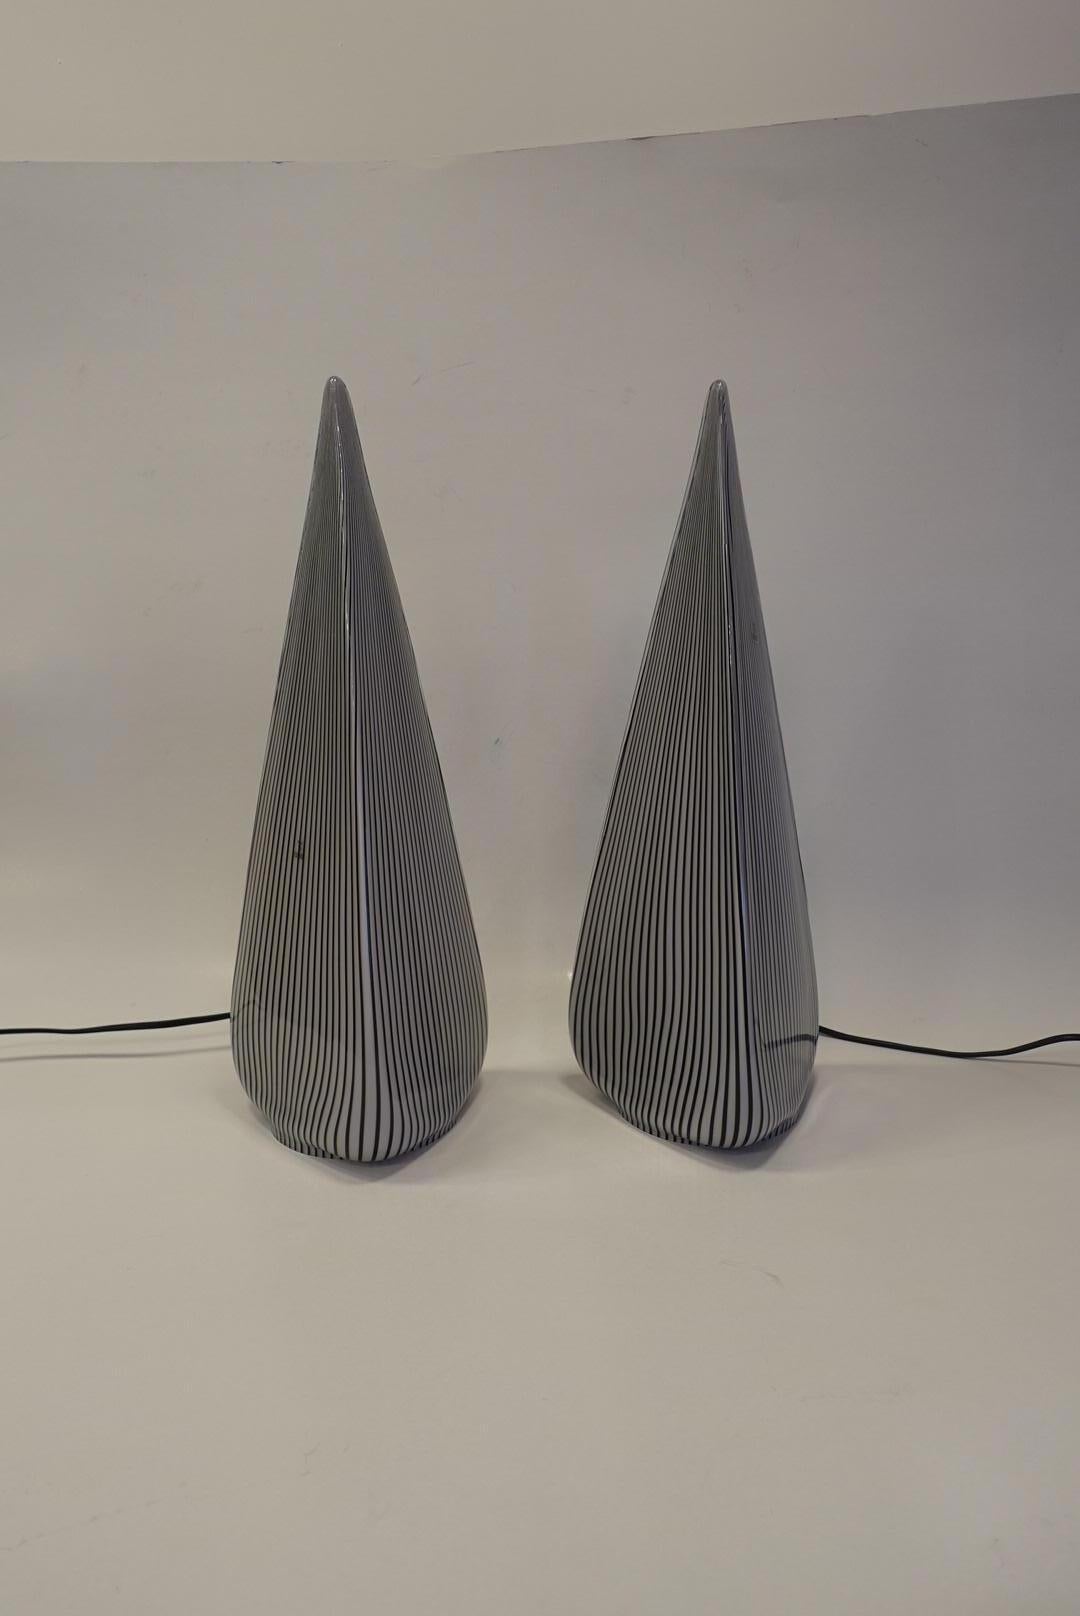 Pair of pyramid lamps in opaque white.
Brown-black candy stripes.
Signed with its original label.